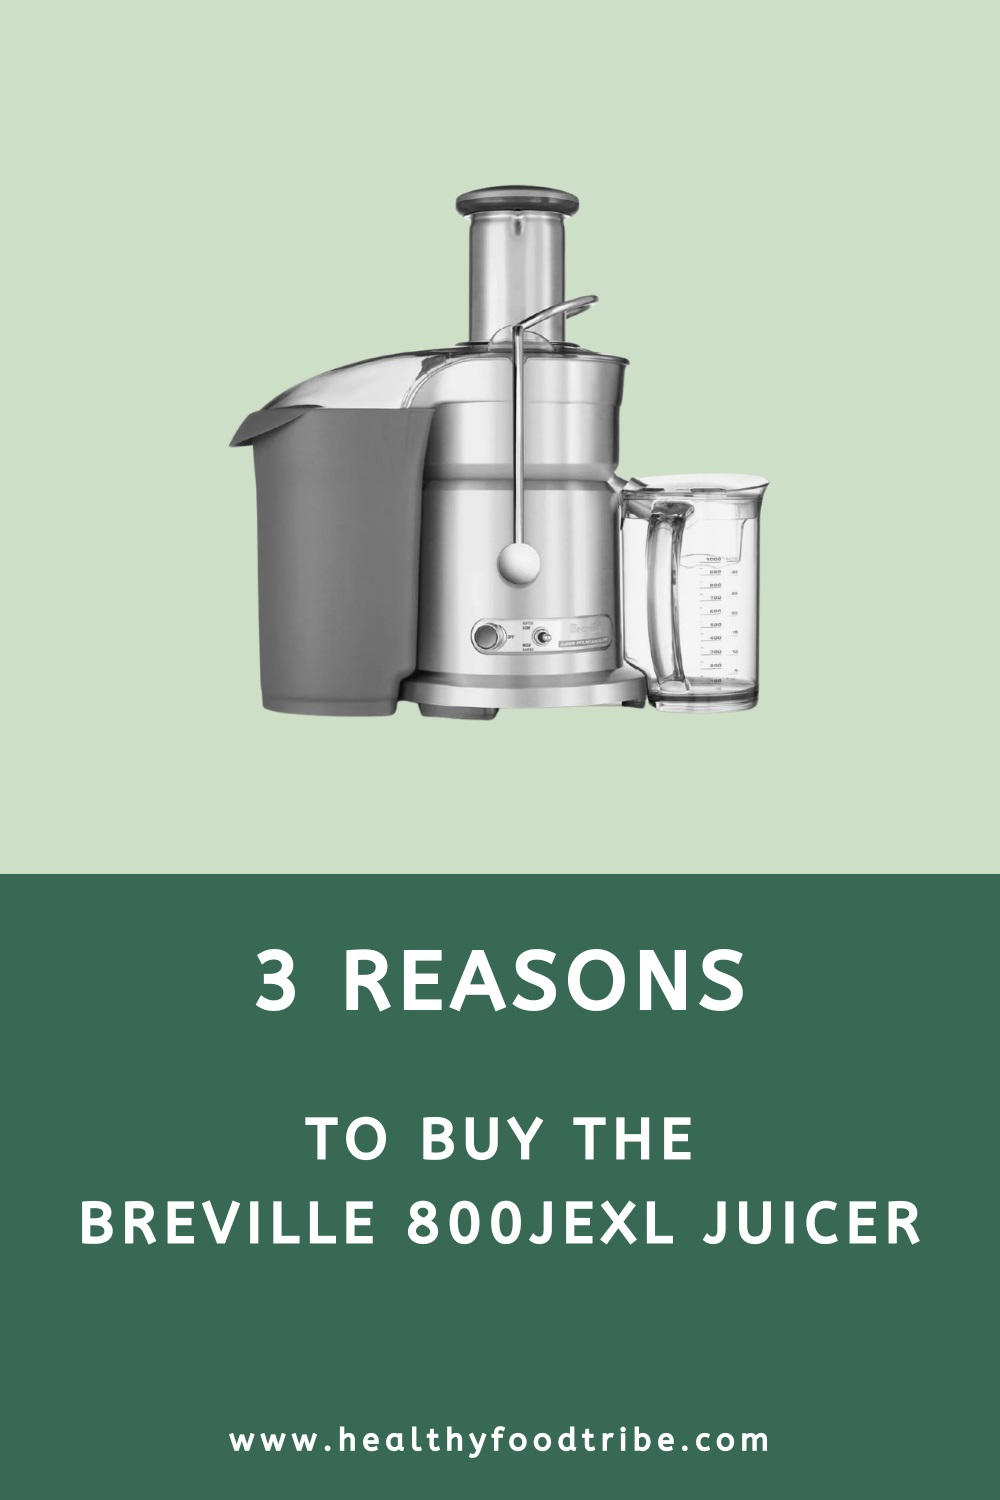 Three reasons to buy the Breville 800JEXL juicer